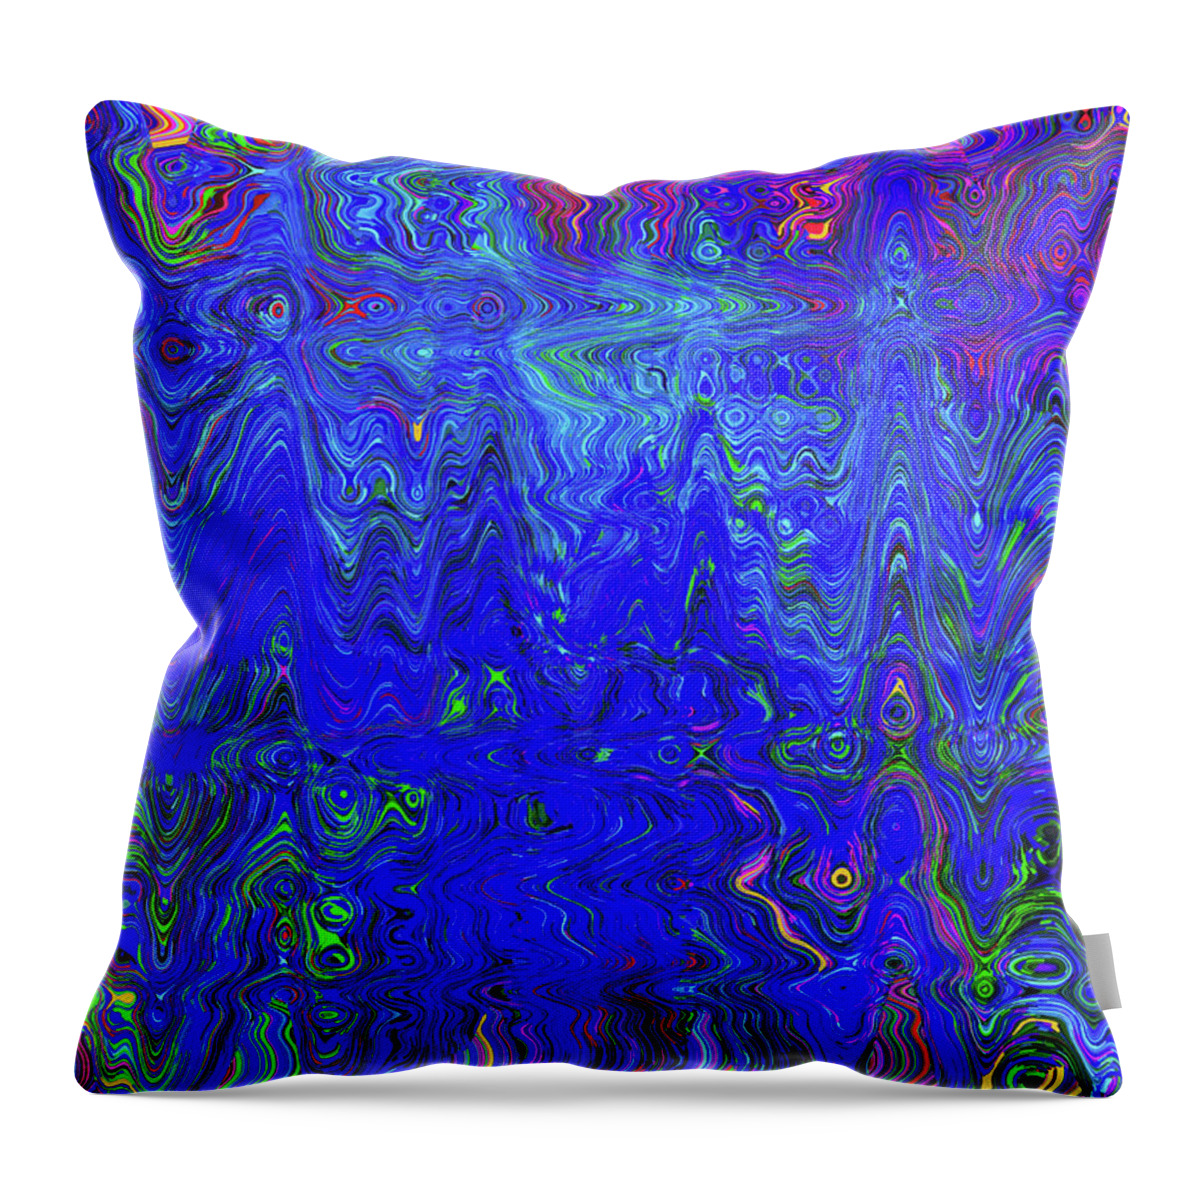 Red Throw Pillow featuring the digital art Blue Dream by Philip Brent